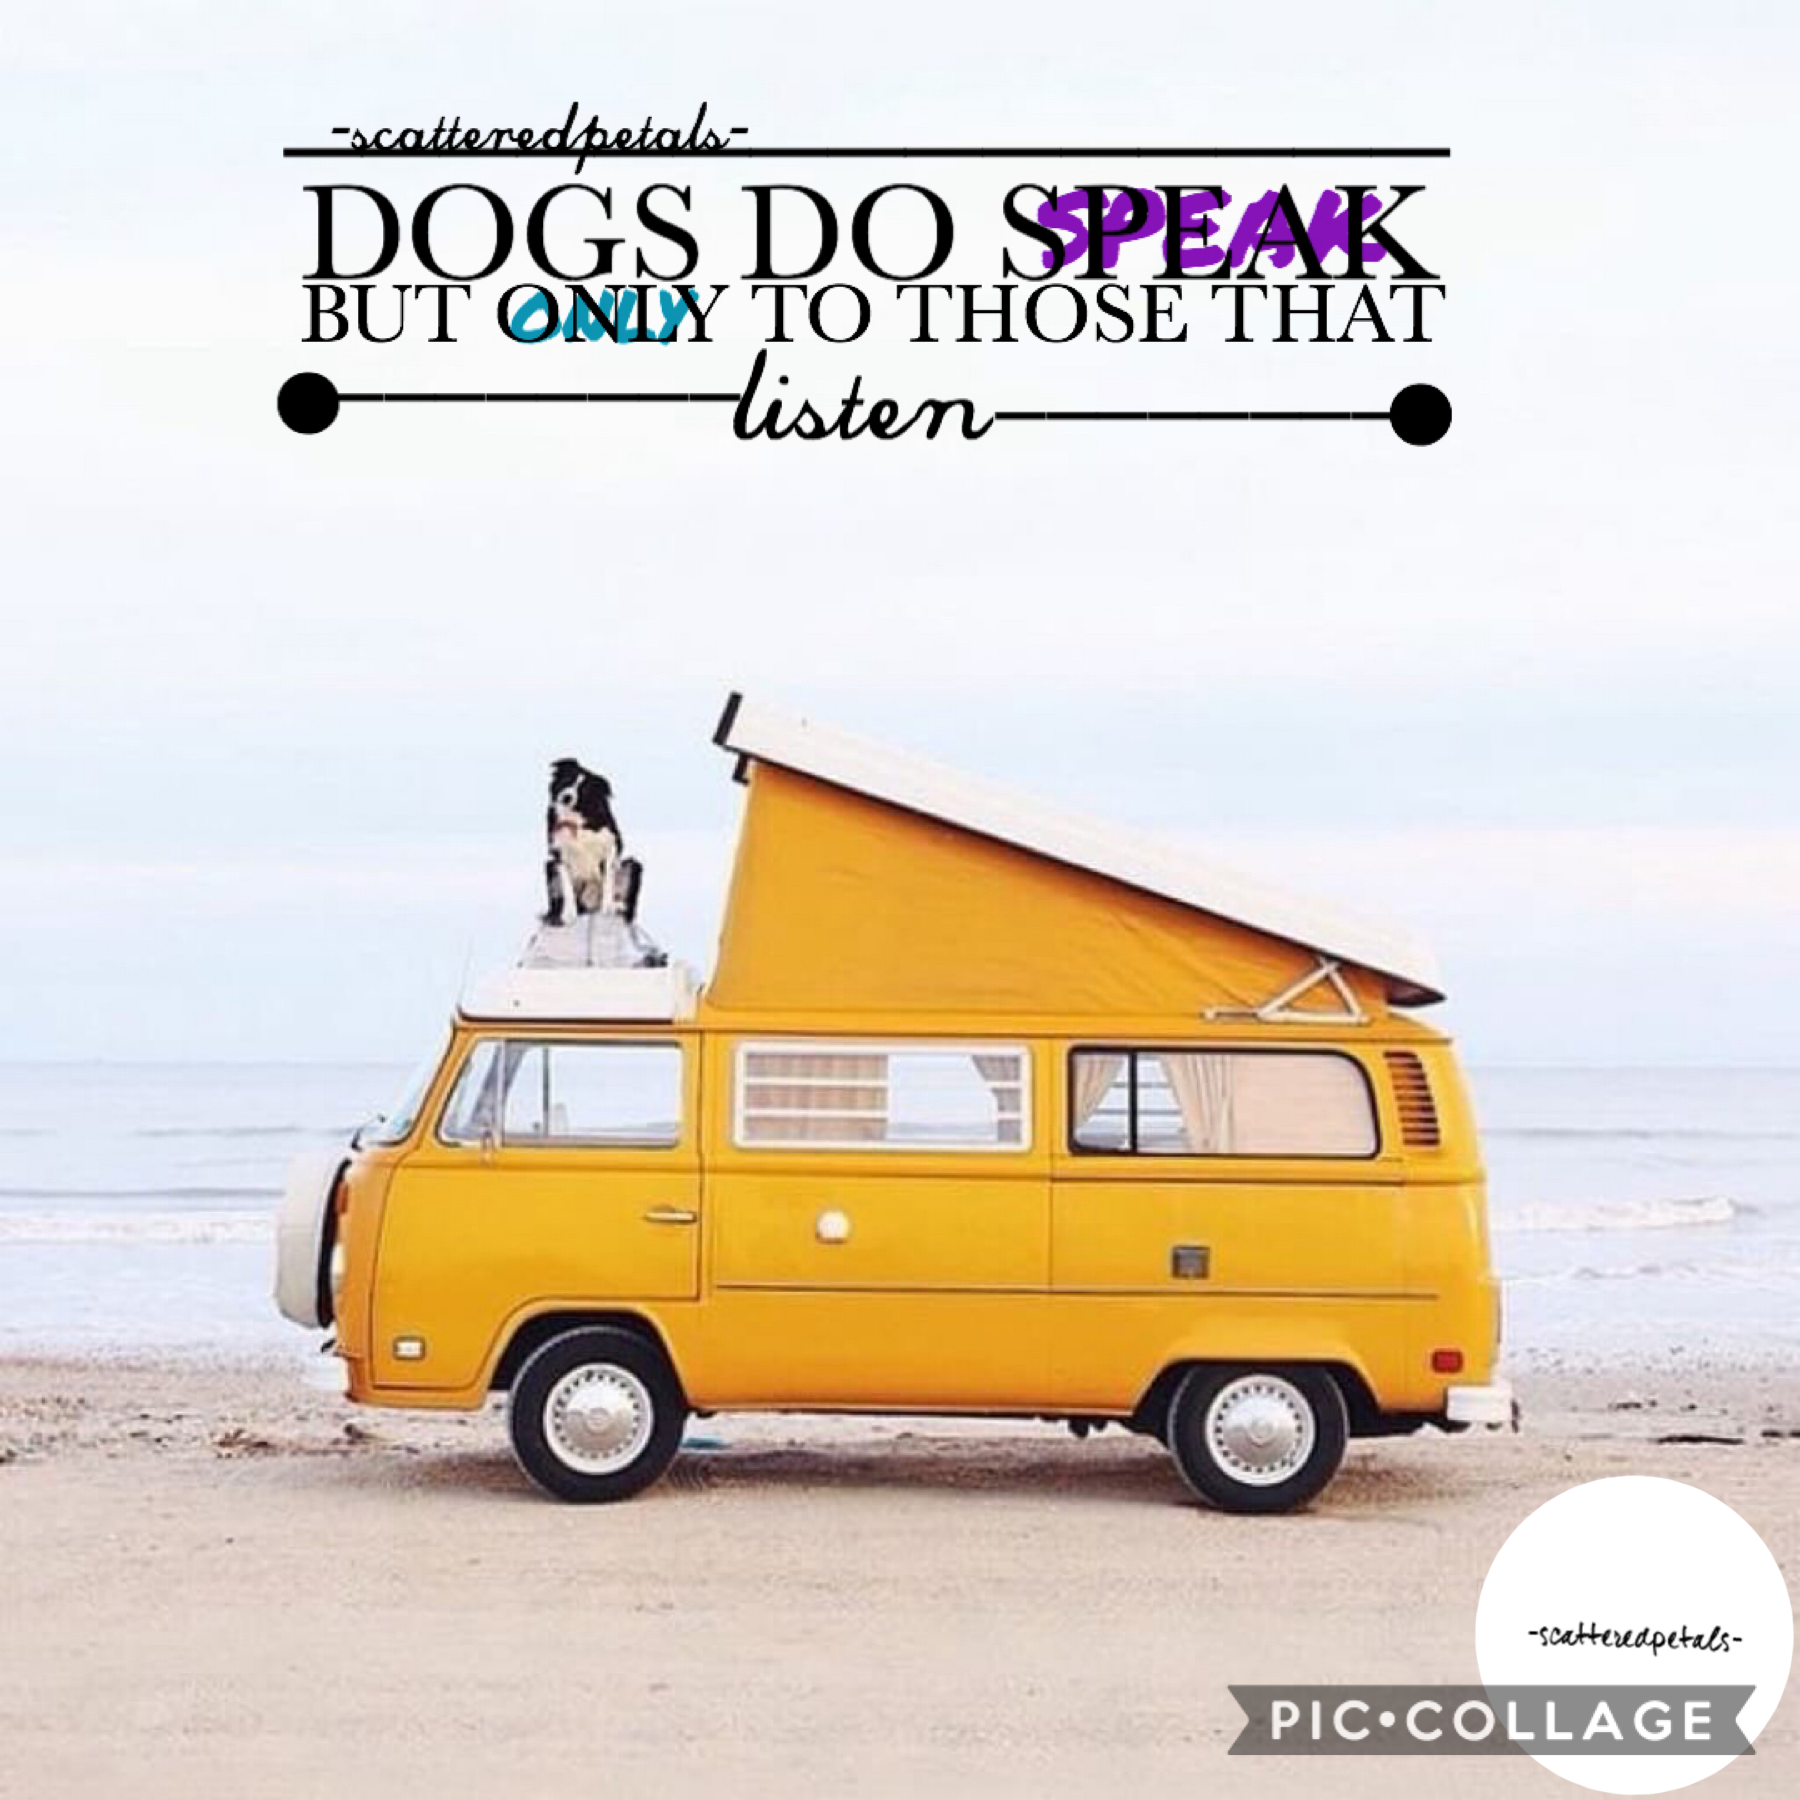 Tap
What do you think, let me know!
Quote: “Dogs do speak, but only to those that listen”
Question: should I change my username?
Suggestions of I do Change my username: -scatteredroses-, -exhale, -scatteredflora-

7/23/20